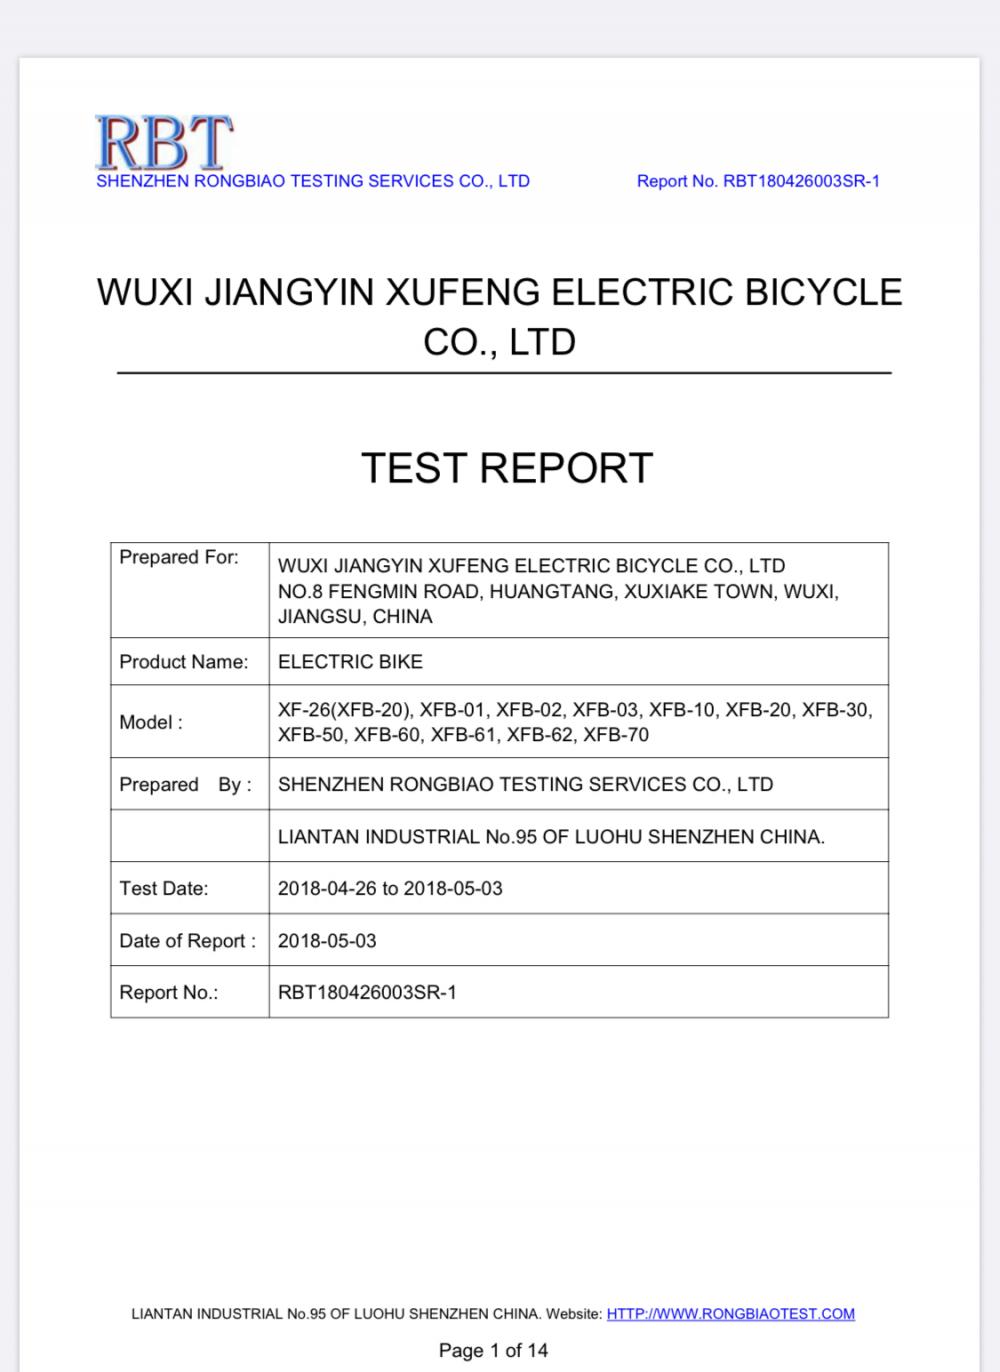 Electric Bicycle Certificate